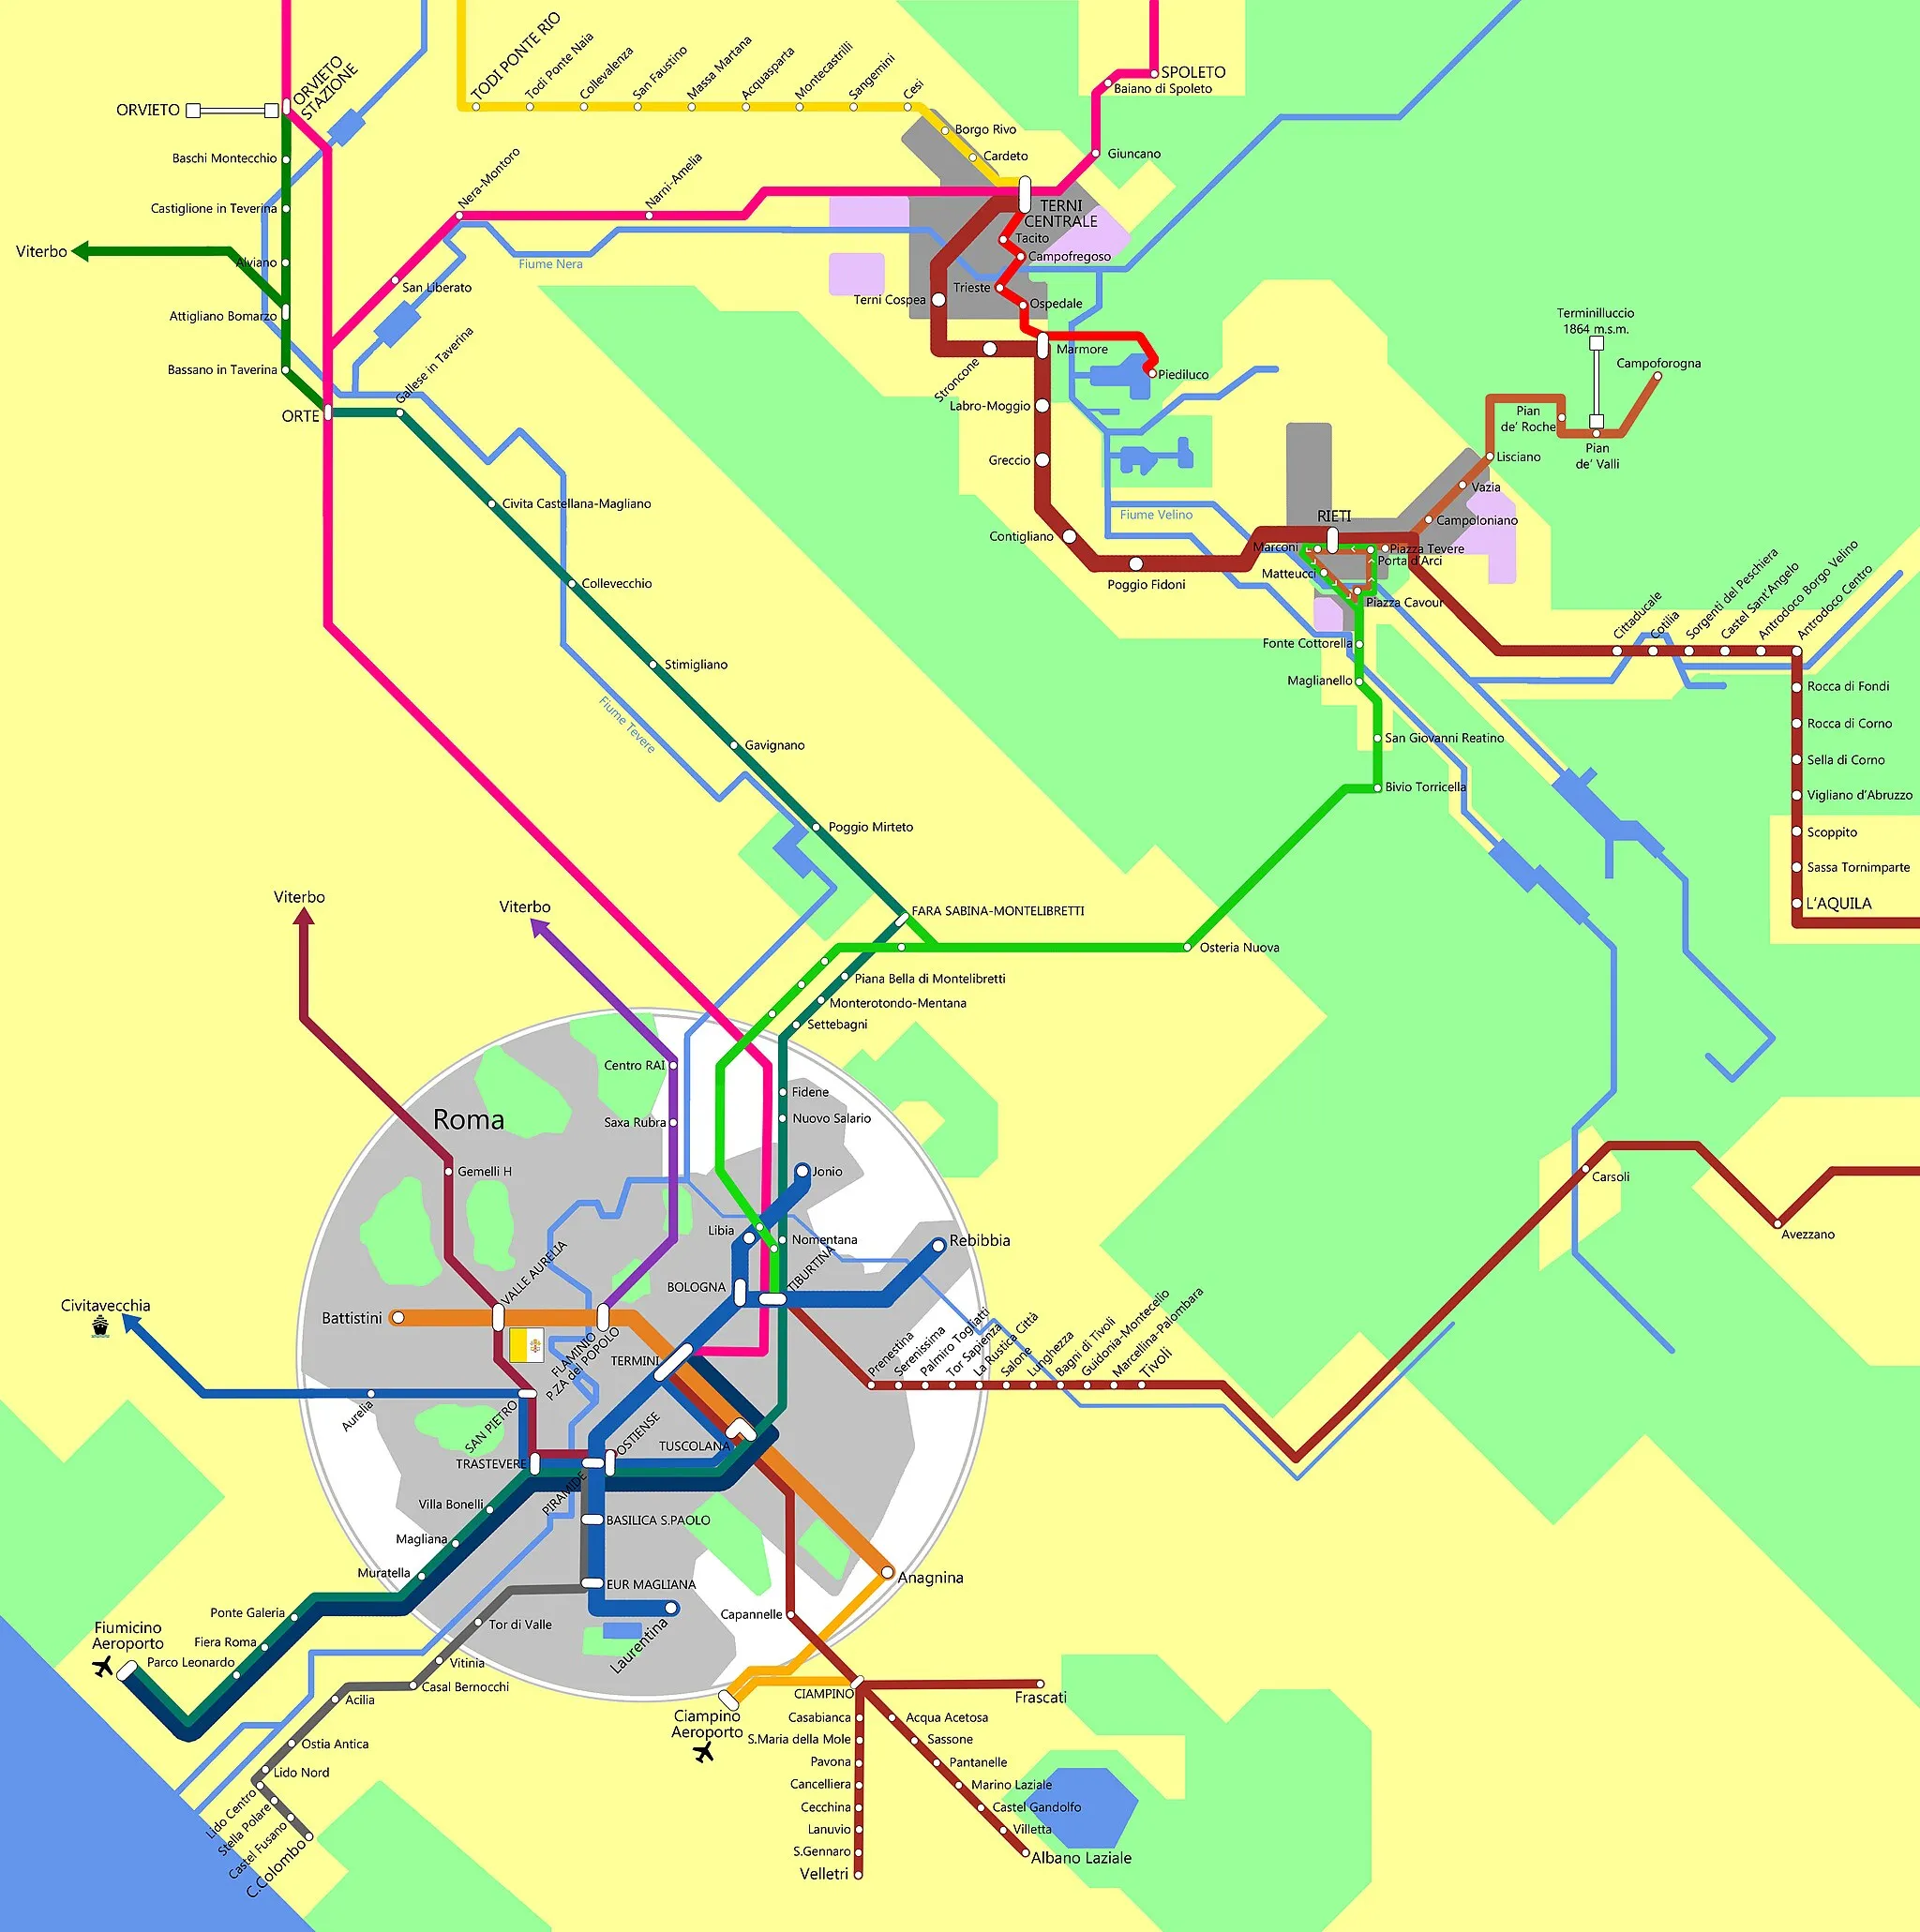 Photo showing: map of the public transport system in the northeast metropolitan area of Rome